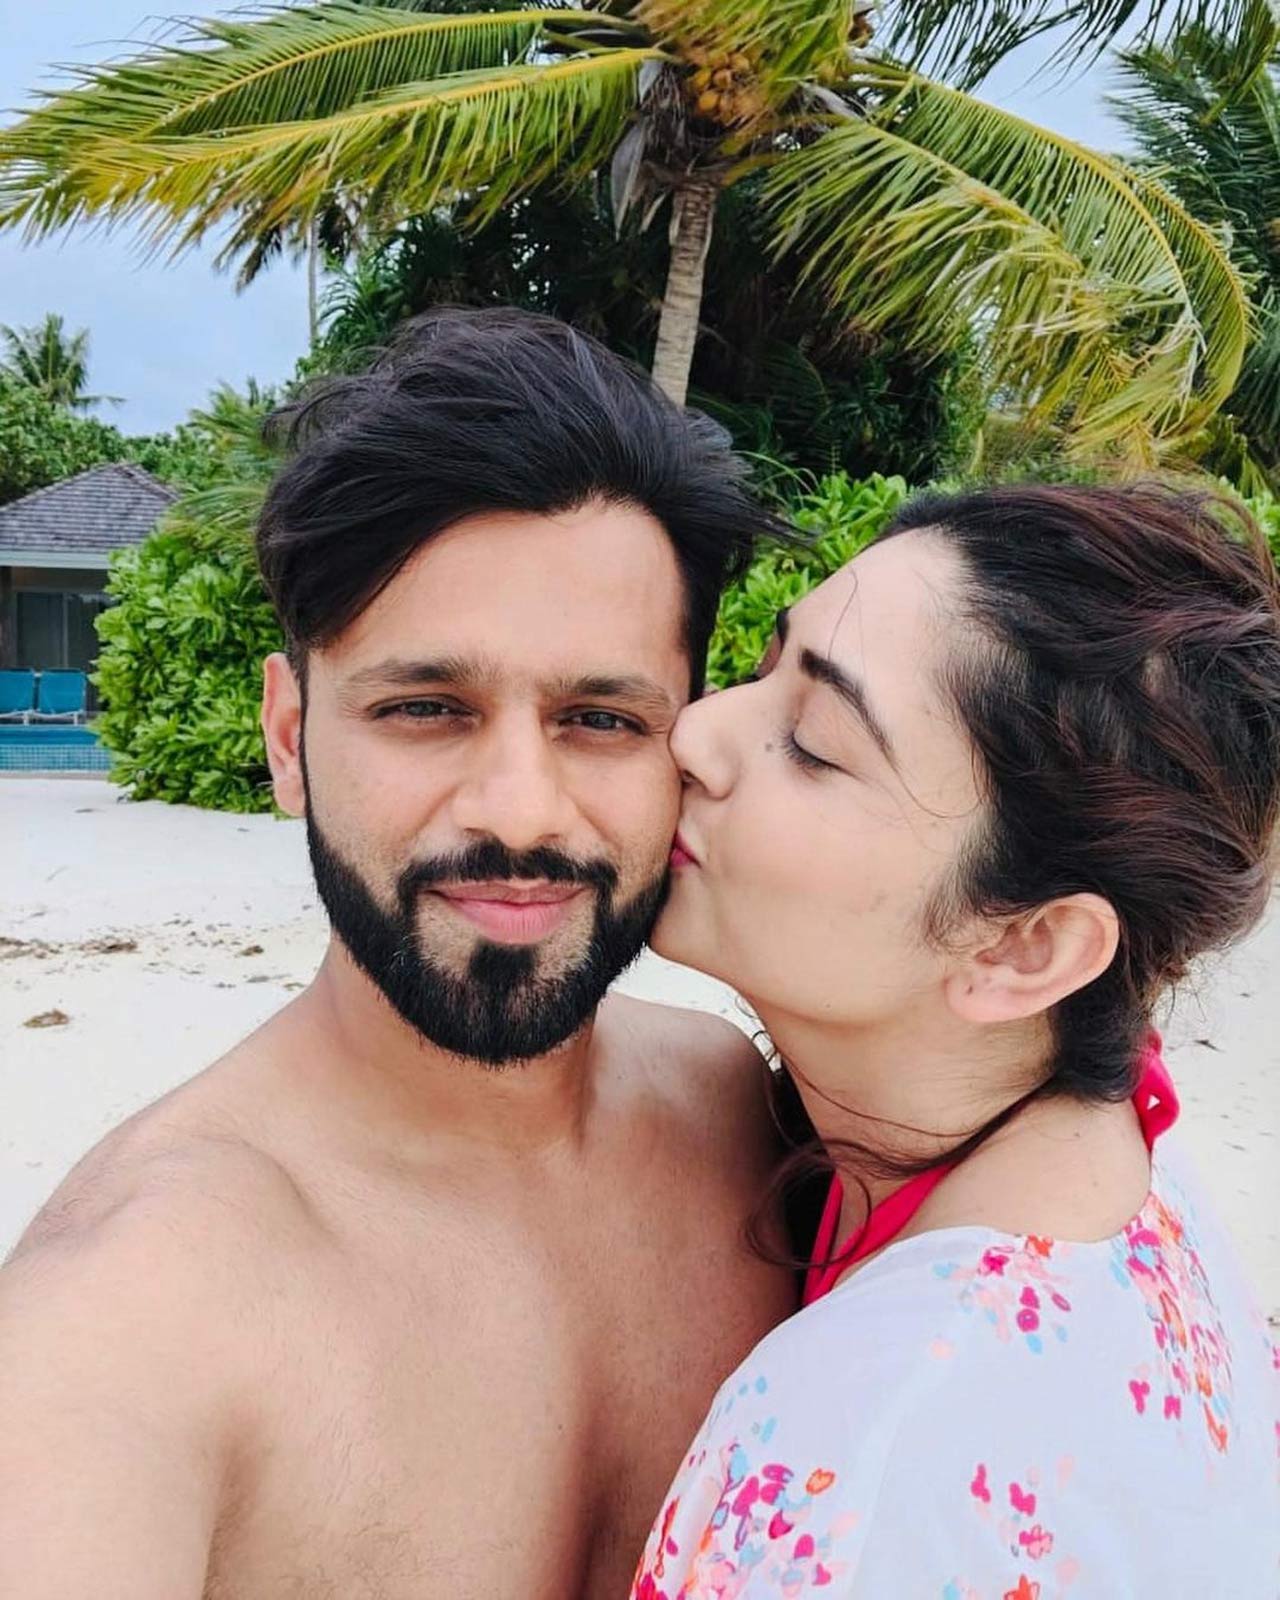 Disha and Rahul tied the knot in a grand wedding ceremony on July 16 this year after dating each other for a while. Their love story became the talk of the town when Rahul proposed to Disha during his stint on 'Bigg Boss 14'. Rahul Vaidya, who rose to fame with his stint in the popular reality show Bigg Boss 14, jetted off to the Maldives for a vacation on the beautiful beaches of the Maldives with his wife Disha. As she posted a loved-up picture with huggy, the actress wrote, 